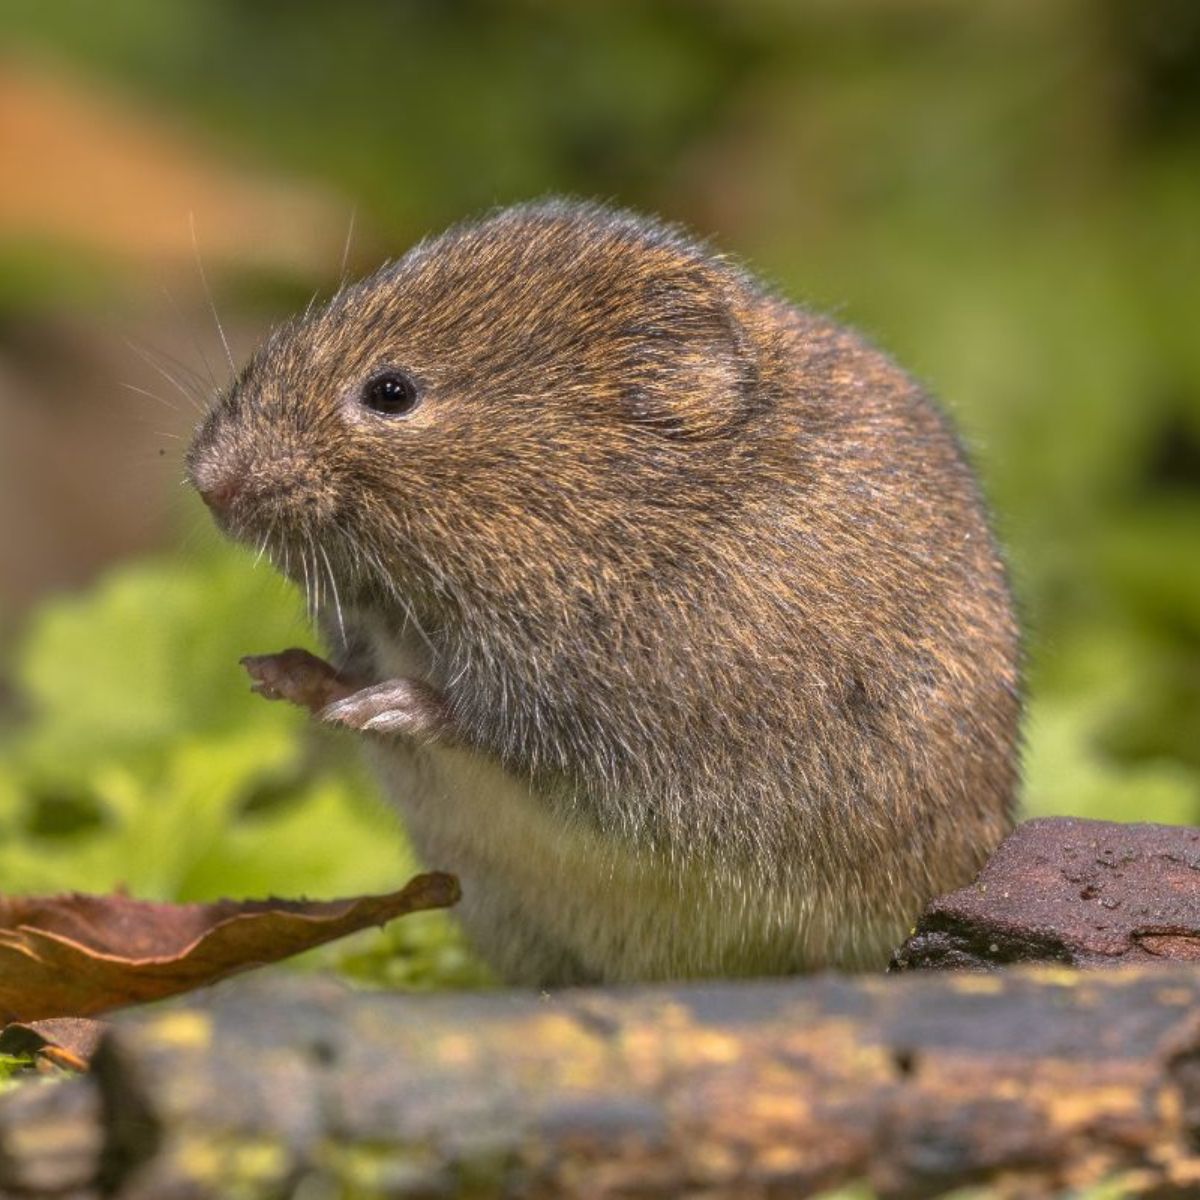 https://gardening.org/wp-content/uploads/2022/06/7-easy-ways-to-keep-voles-out-of-your-garden-featured.jpg